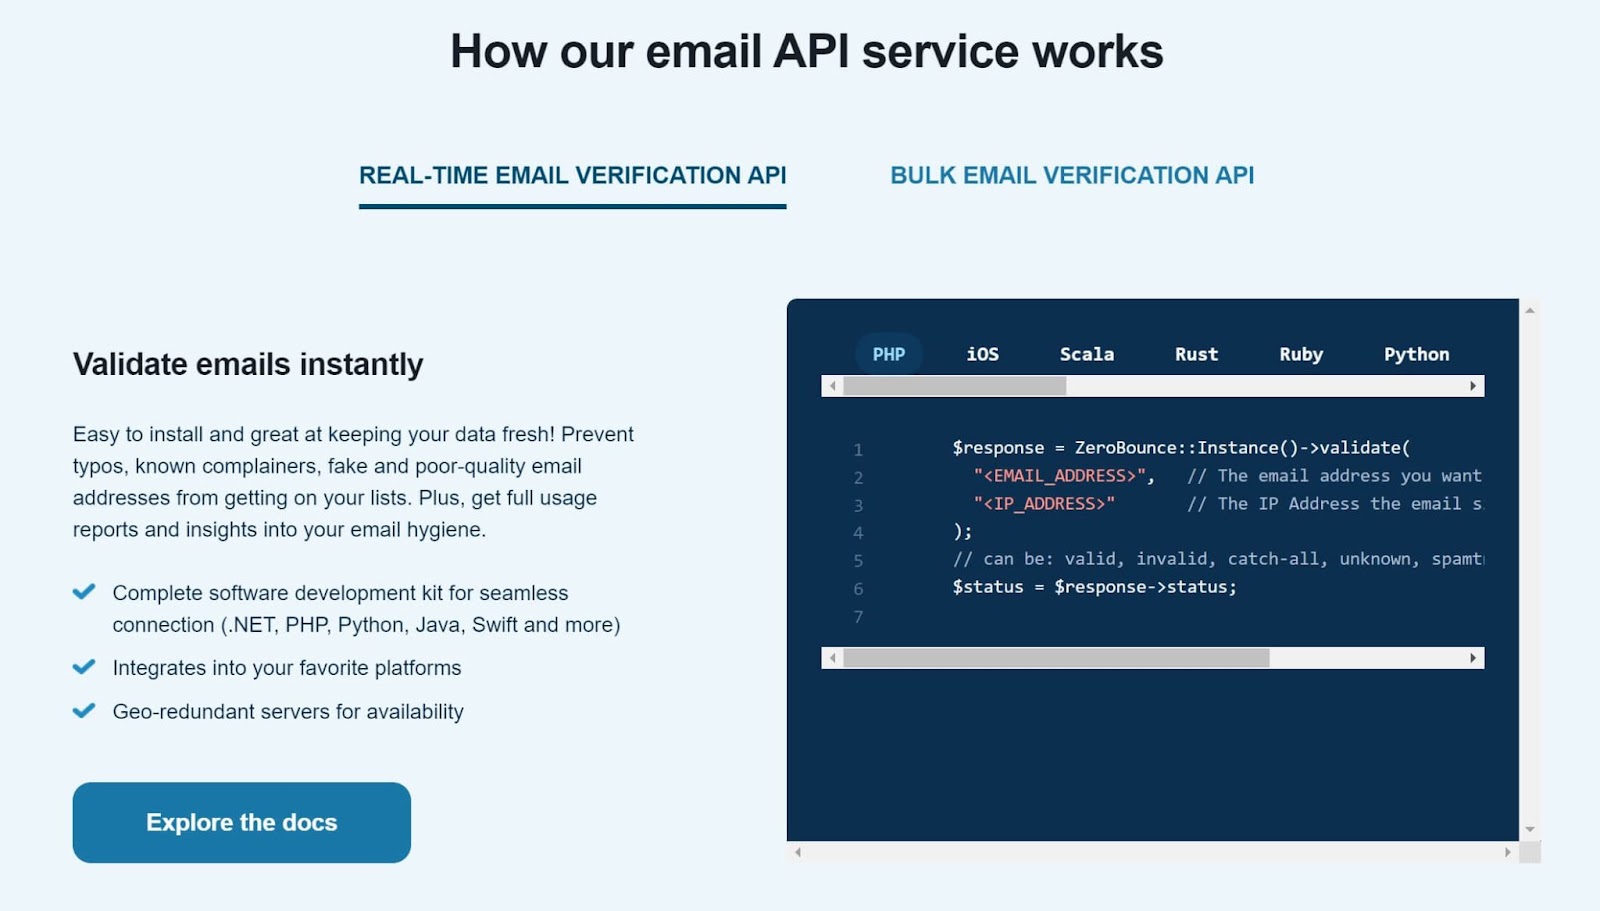 Screenshot of website demonstrates how ZeroBounce email API service works, a great component of email hygiene.